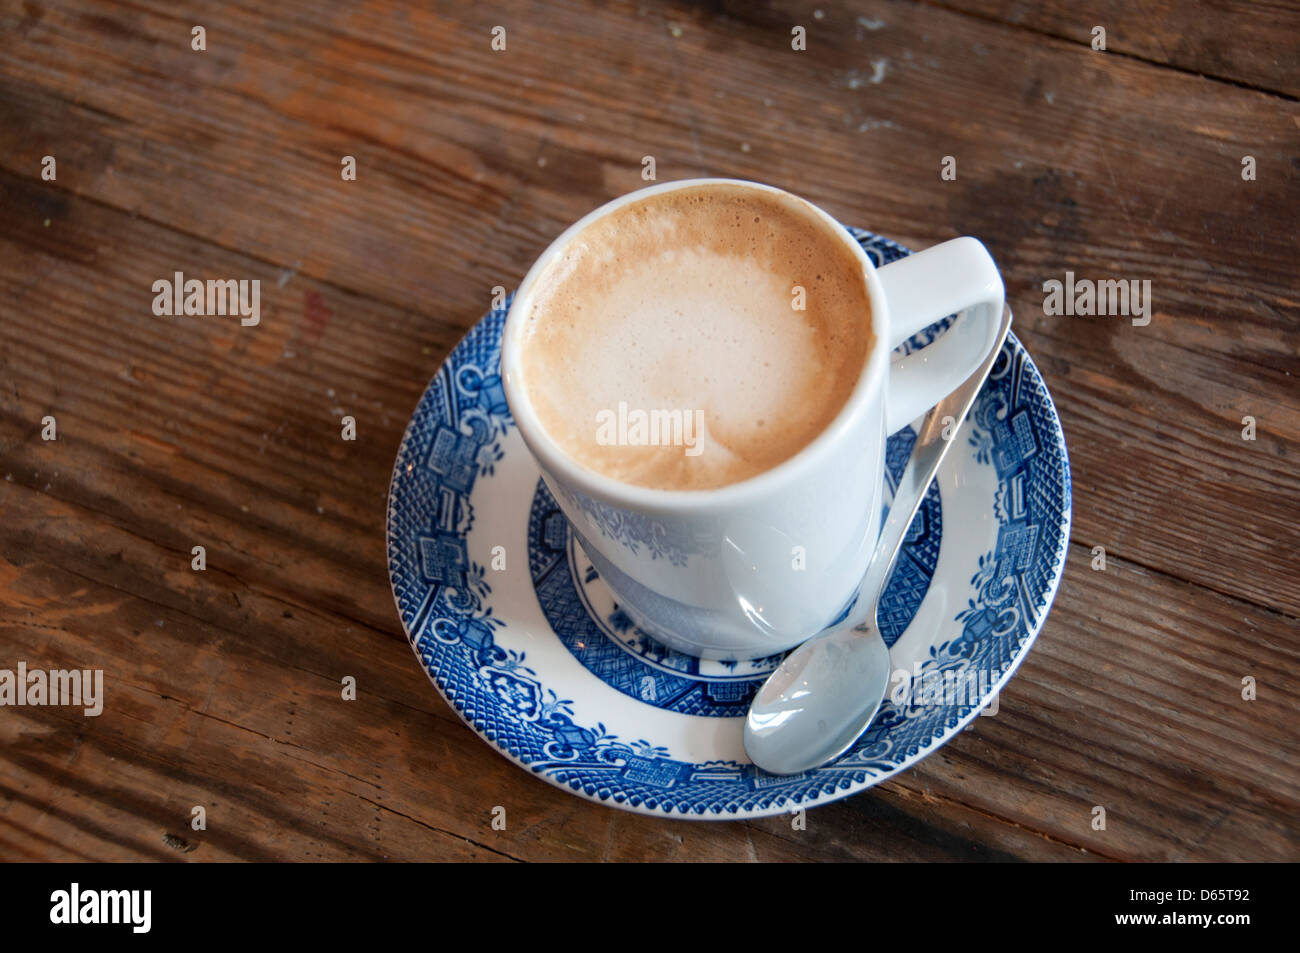 Hackney, London. Flat white coffee in willow pattern cup. Stock Photo